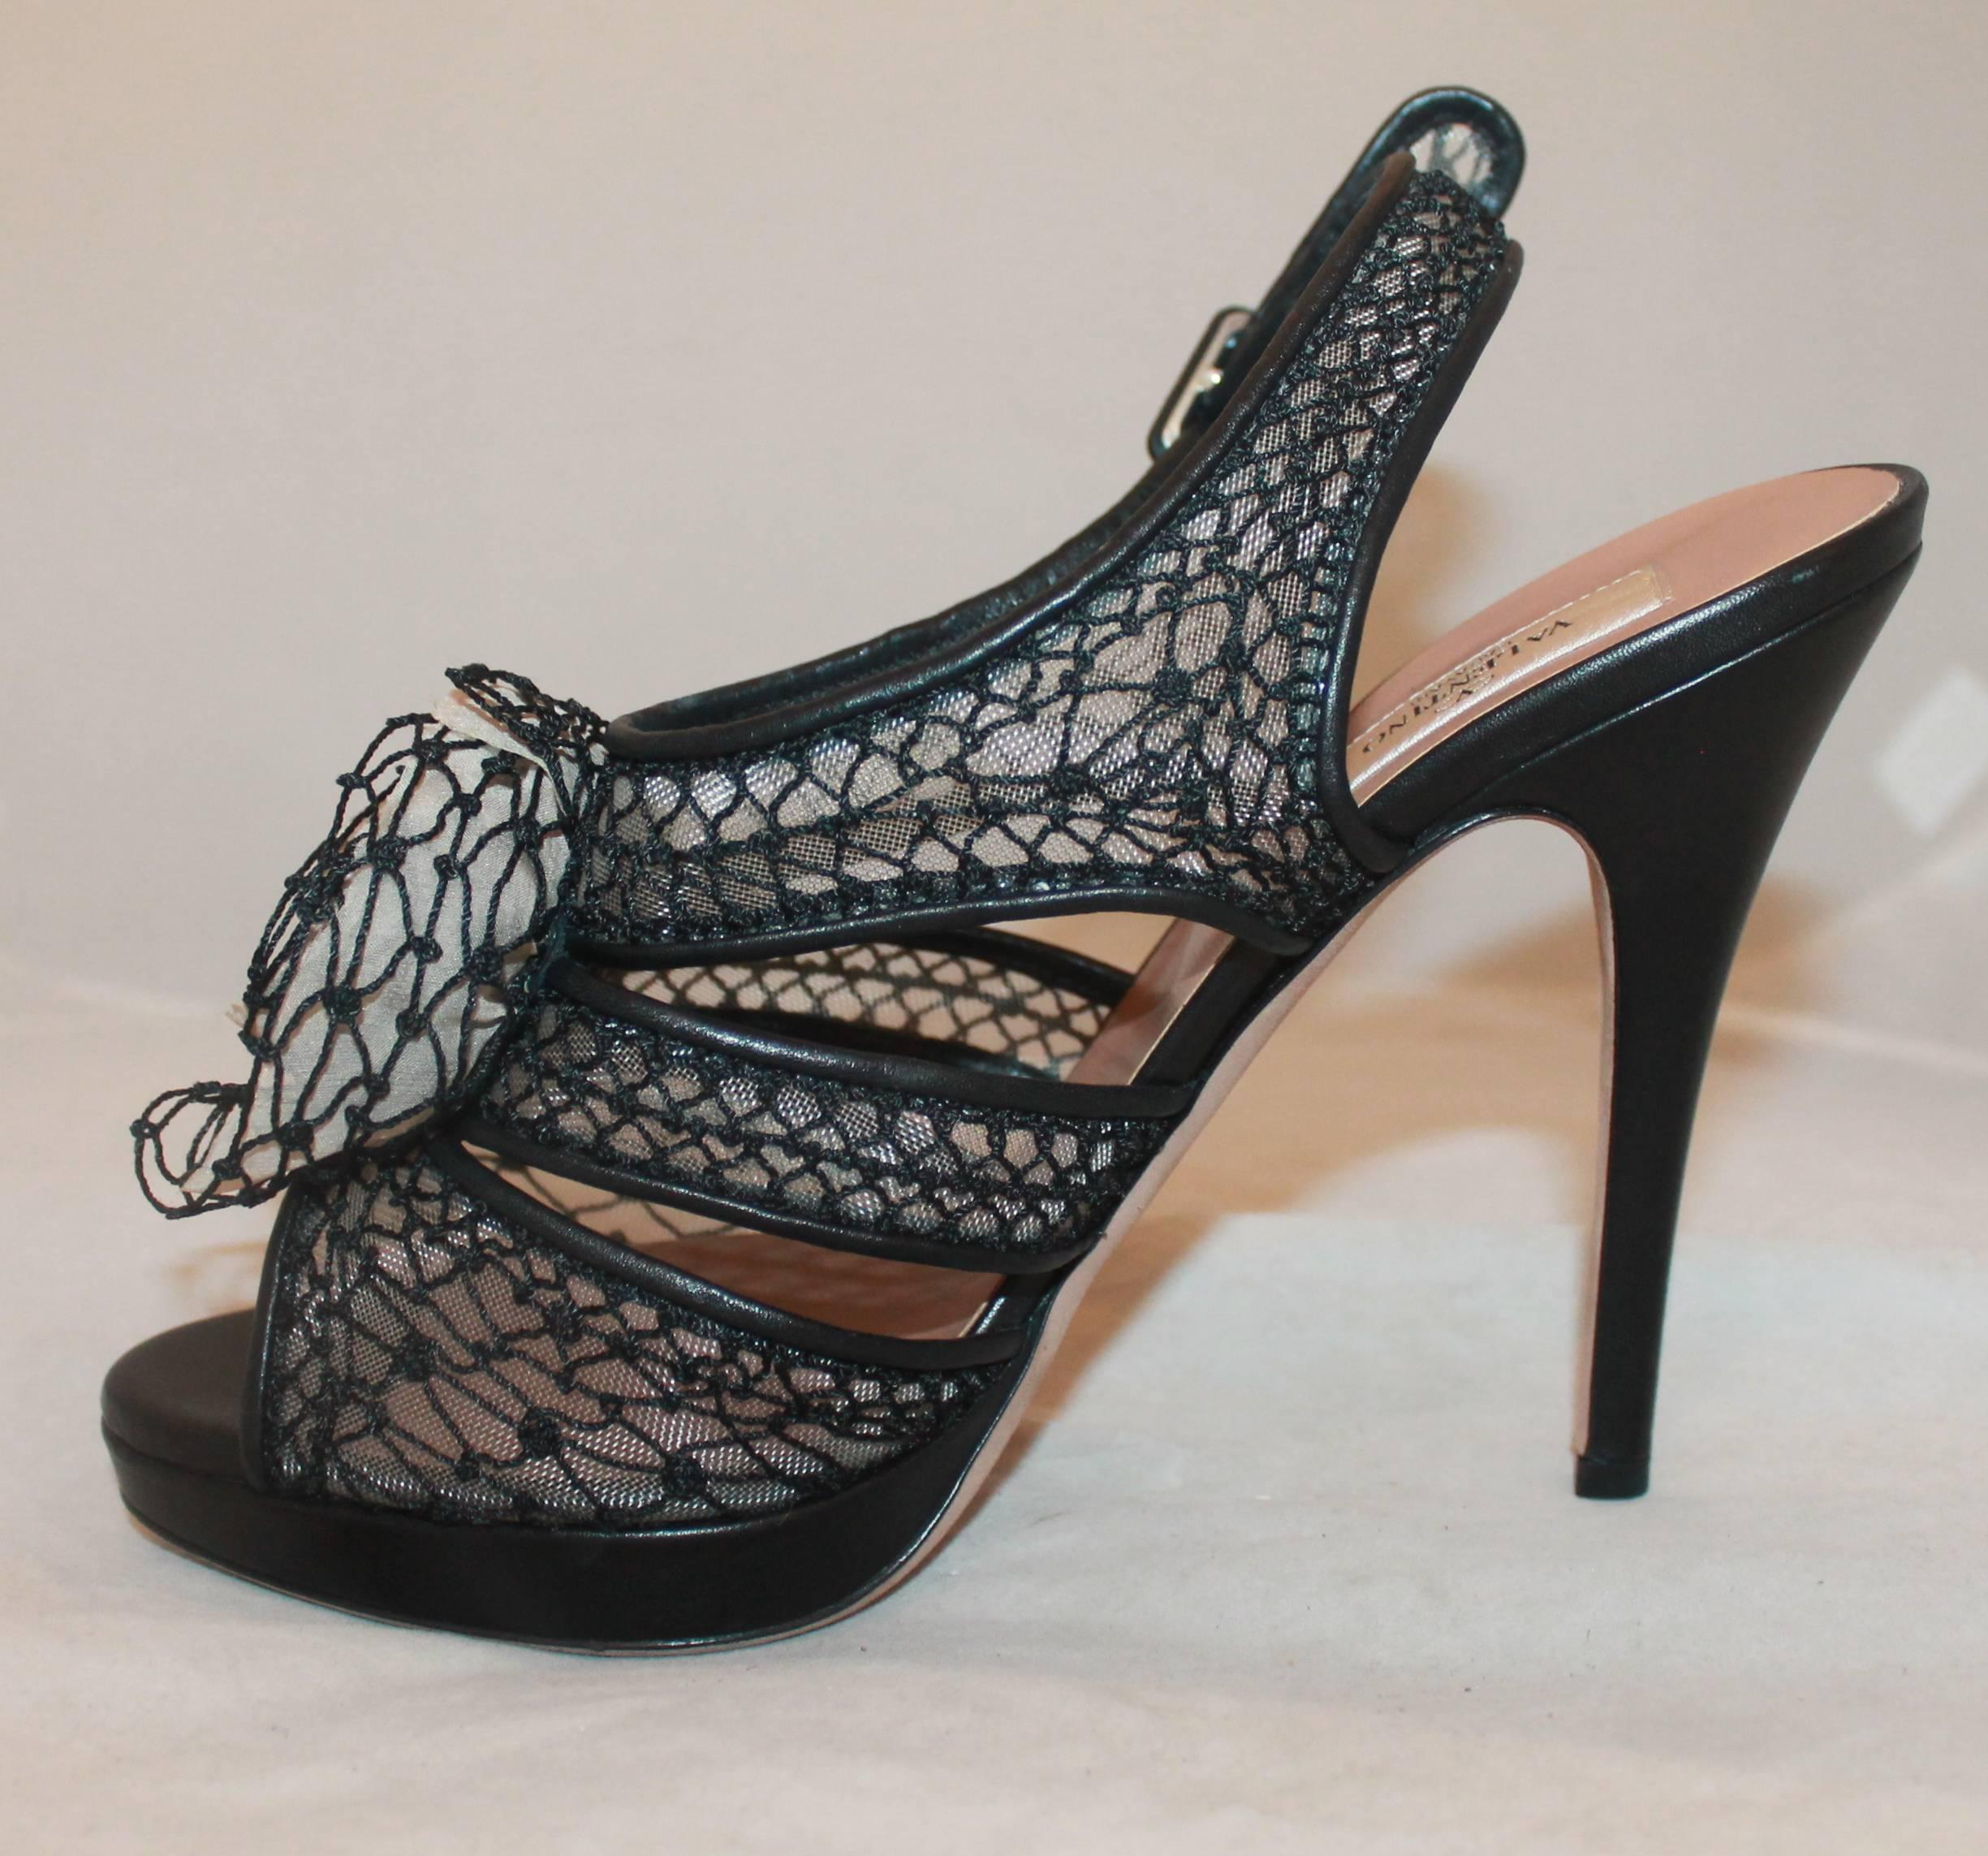 Valentino Beige & Black Mesh Woven Platform Heels with Rose on the Front - 39.5. These unique platform heels have a woven rose on the front, a leather heel, and a woven/ crochet-esque overlay. They are in excellent condition and show very minor